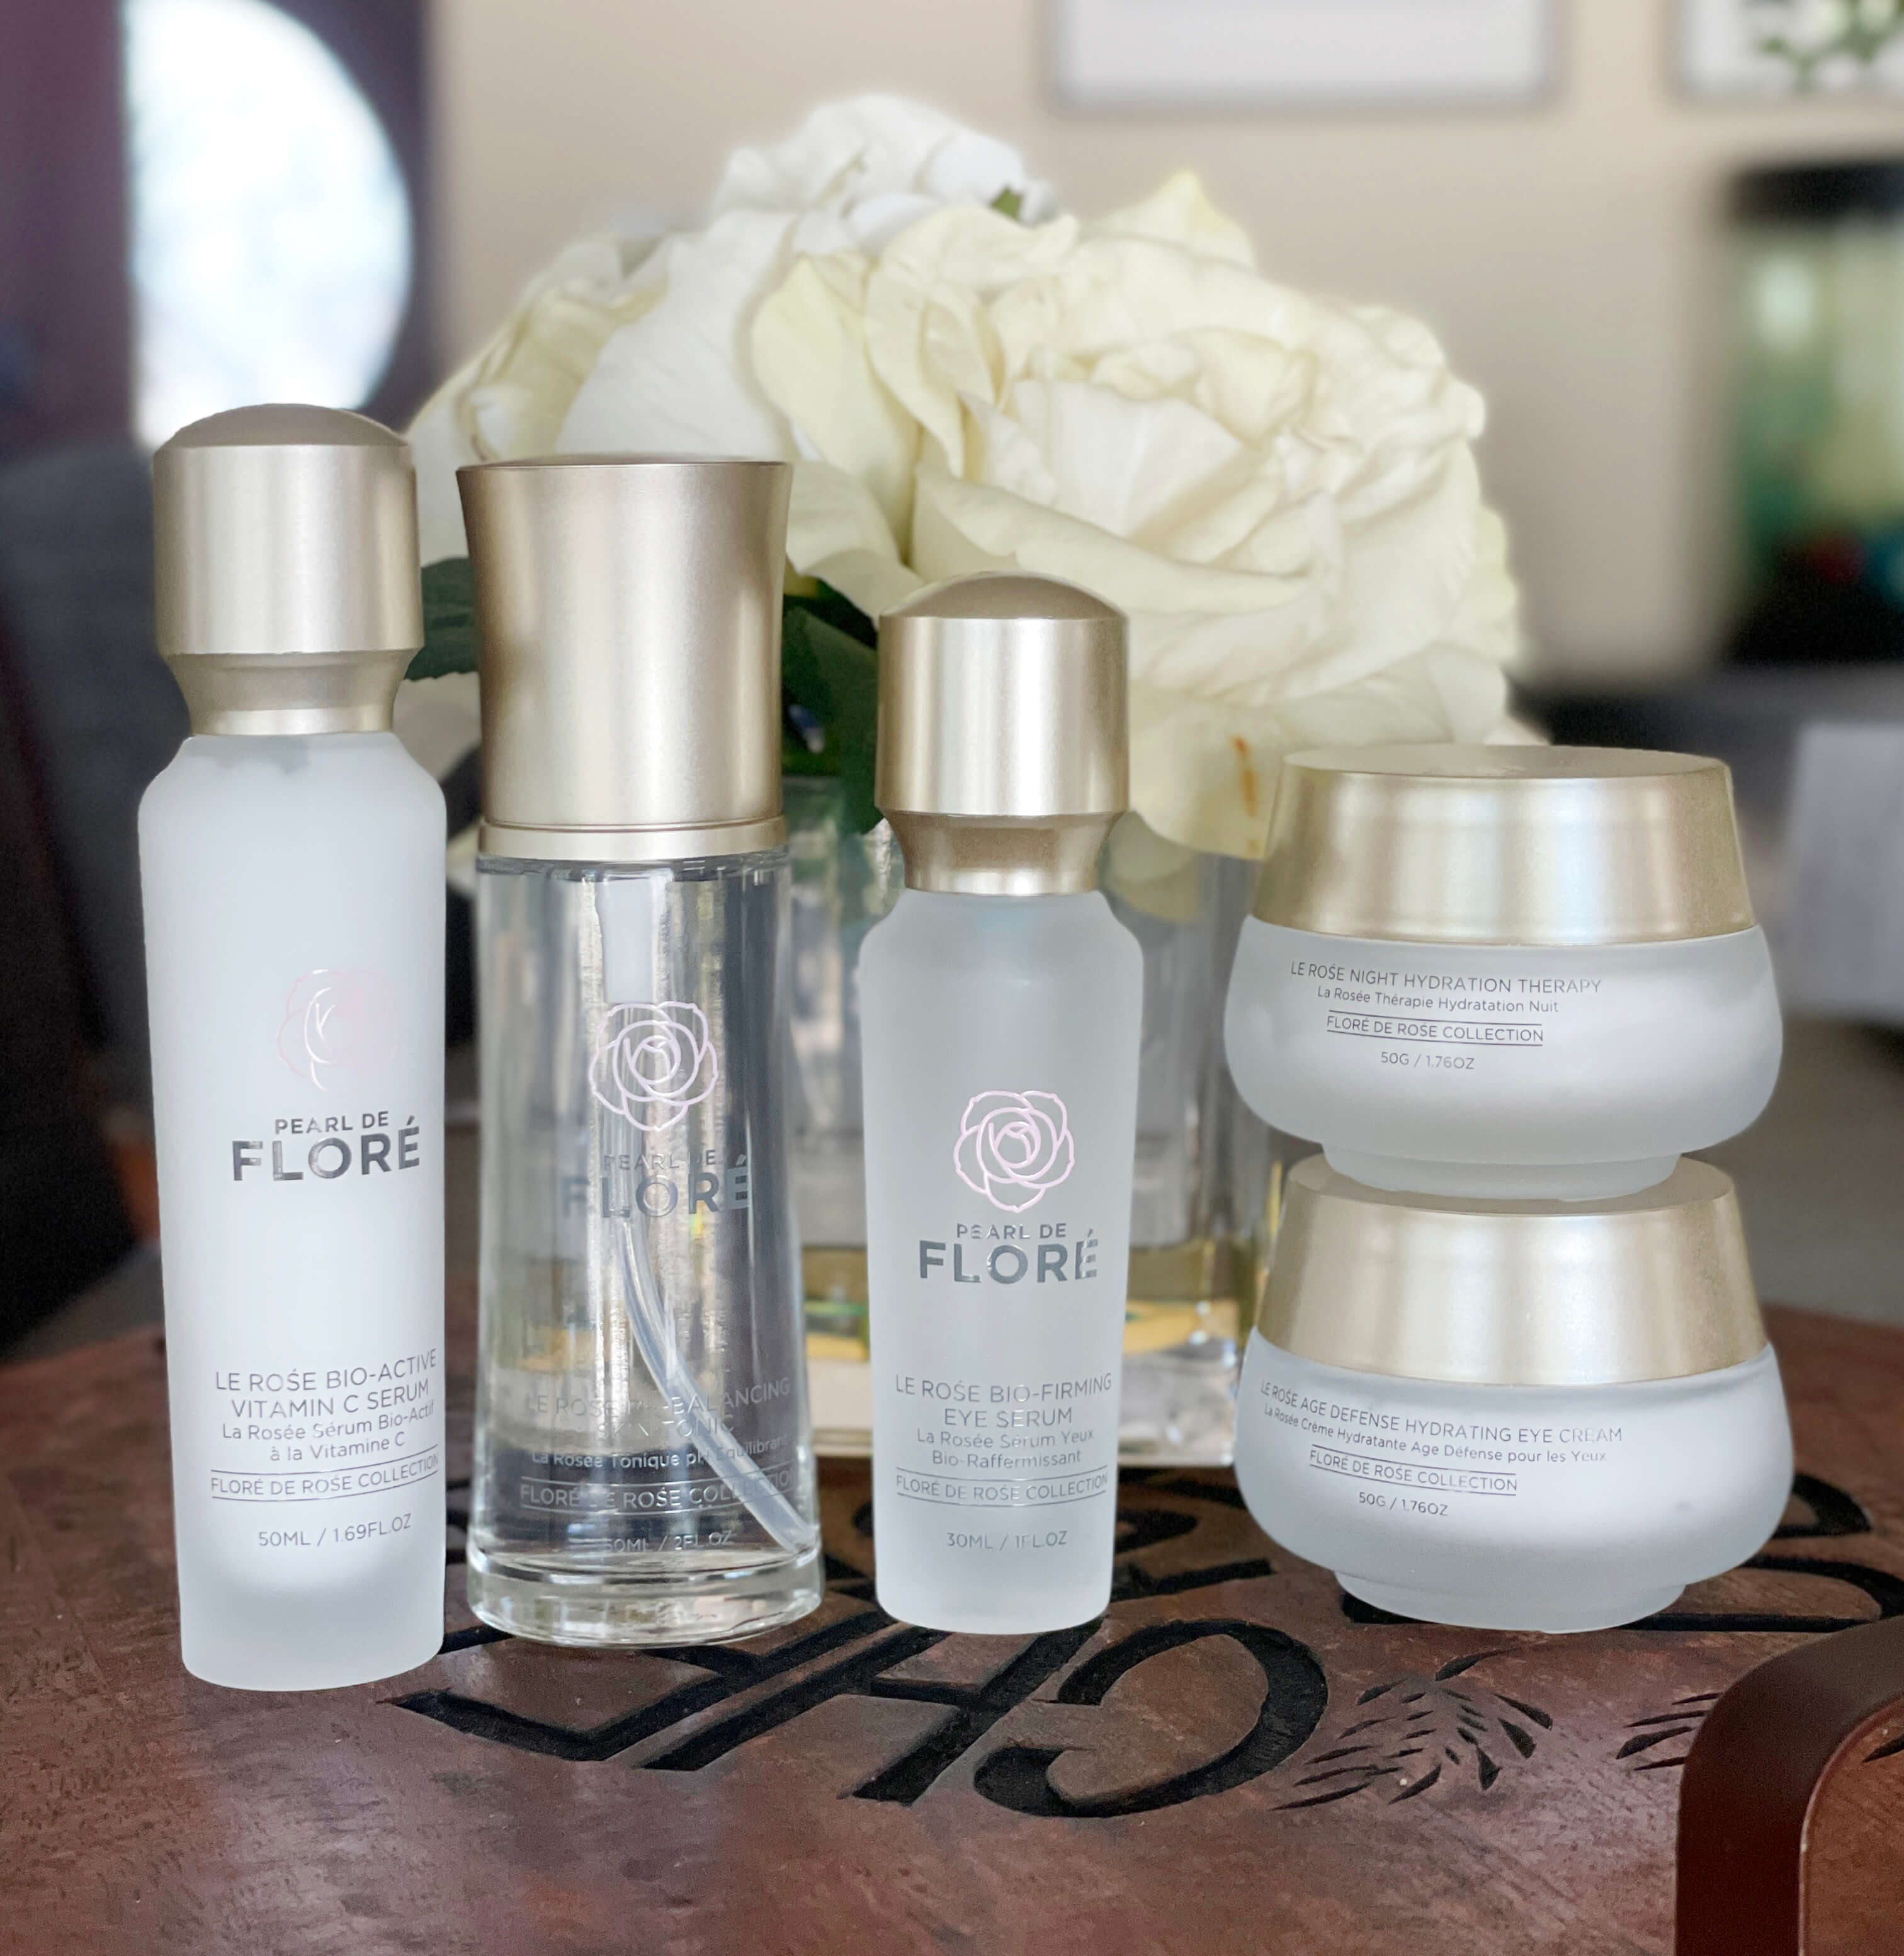 Tried & Tested: The Flore de Rose Collection from Pearl de Flore